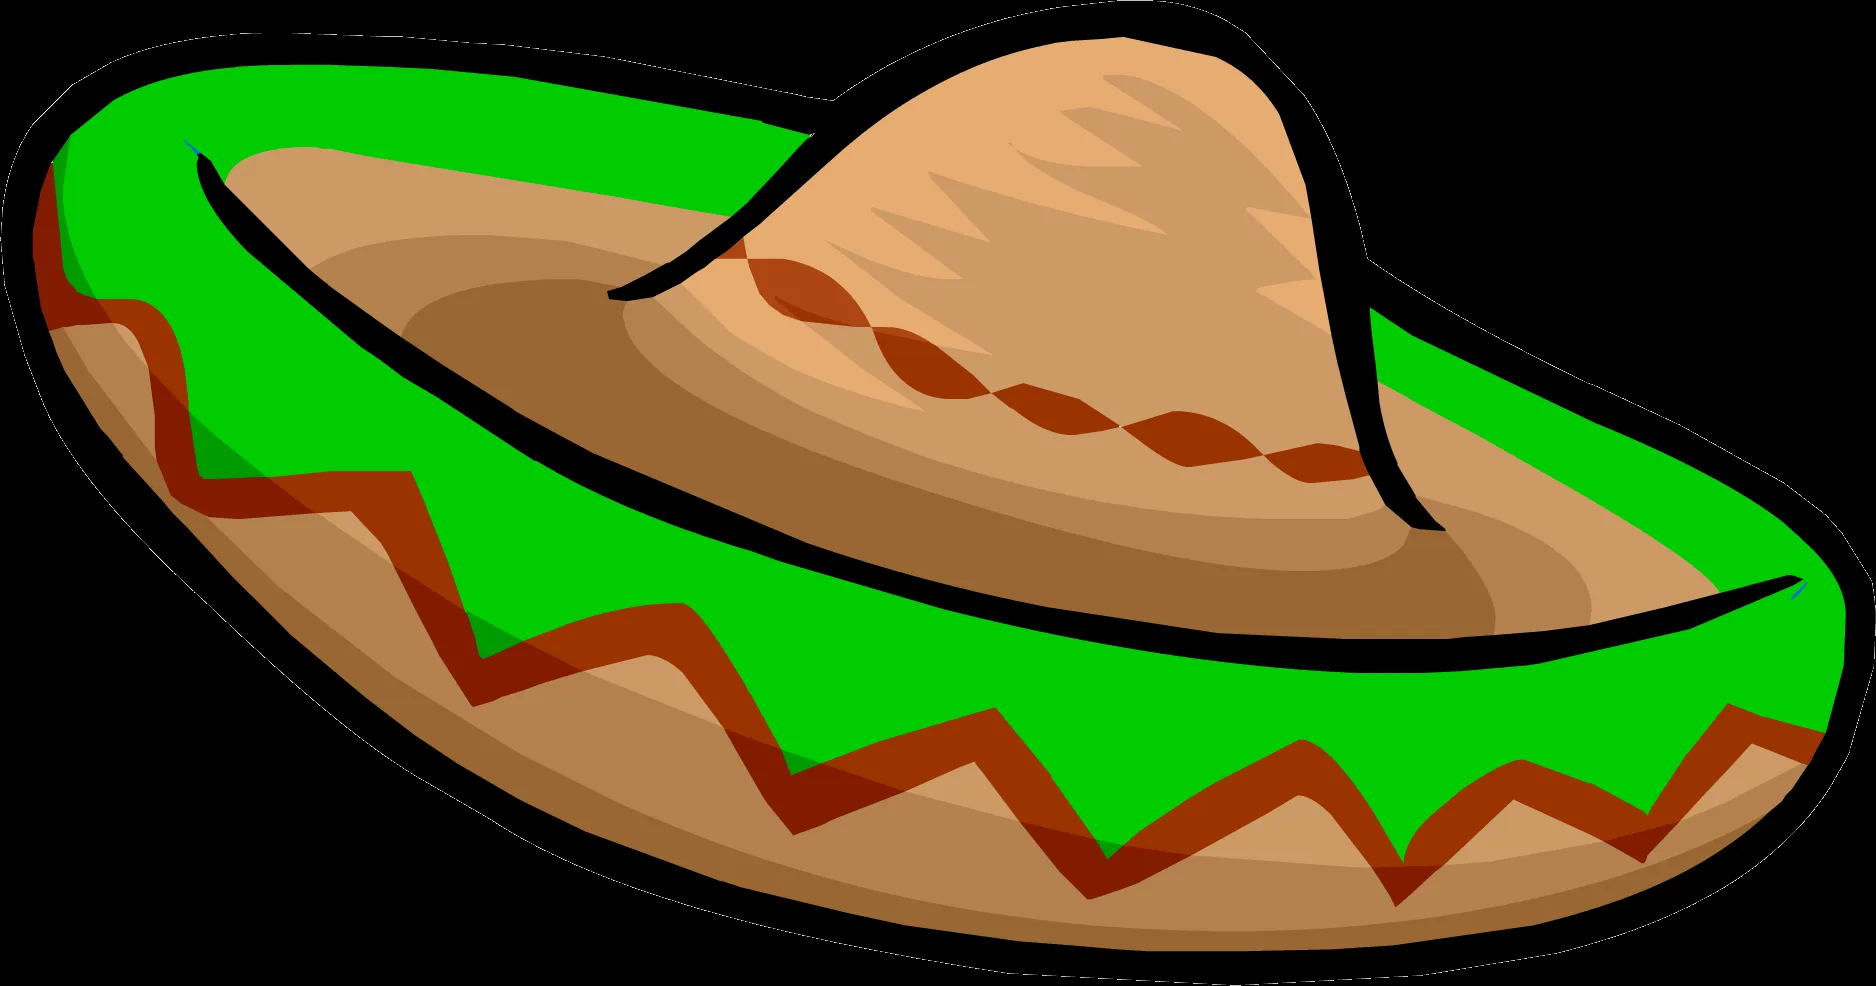 Sombrero Mexicano Png Images & Pictures - Becuo